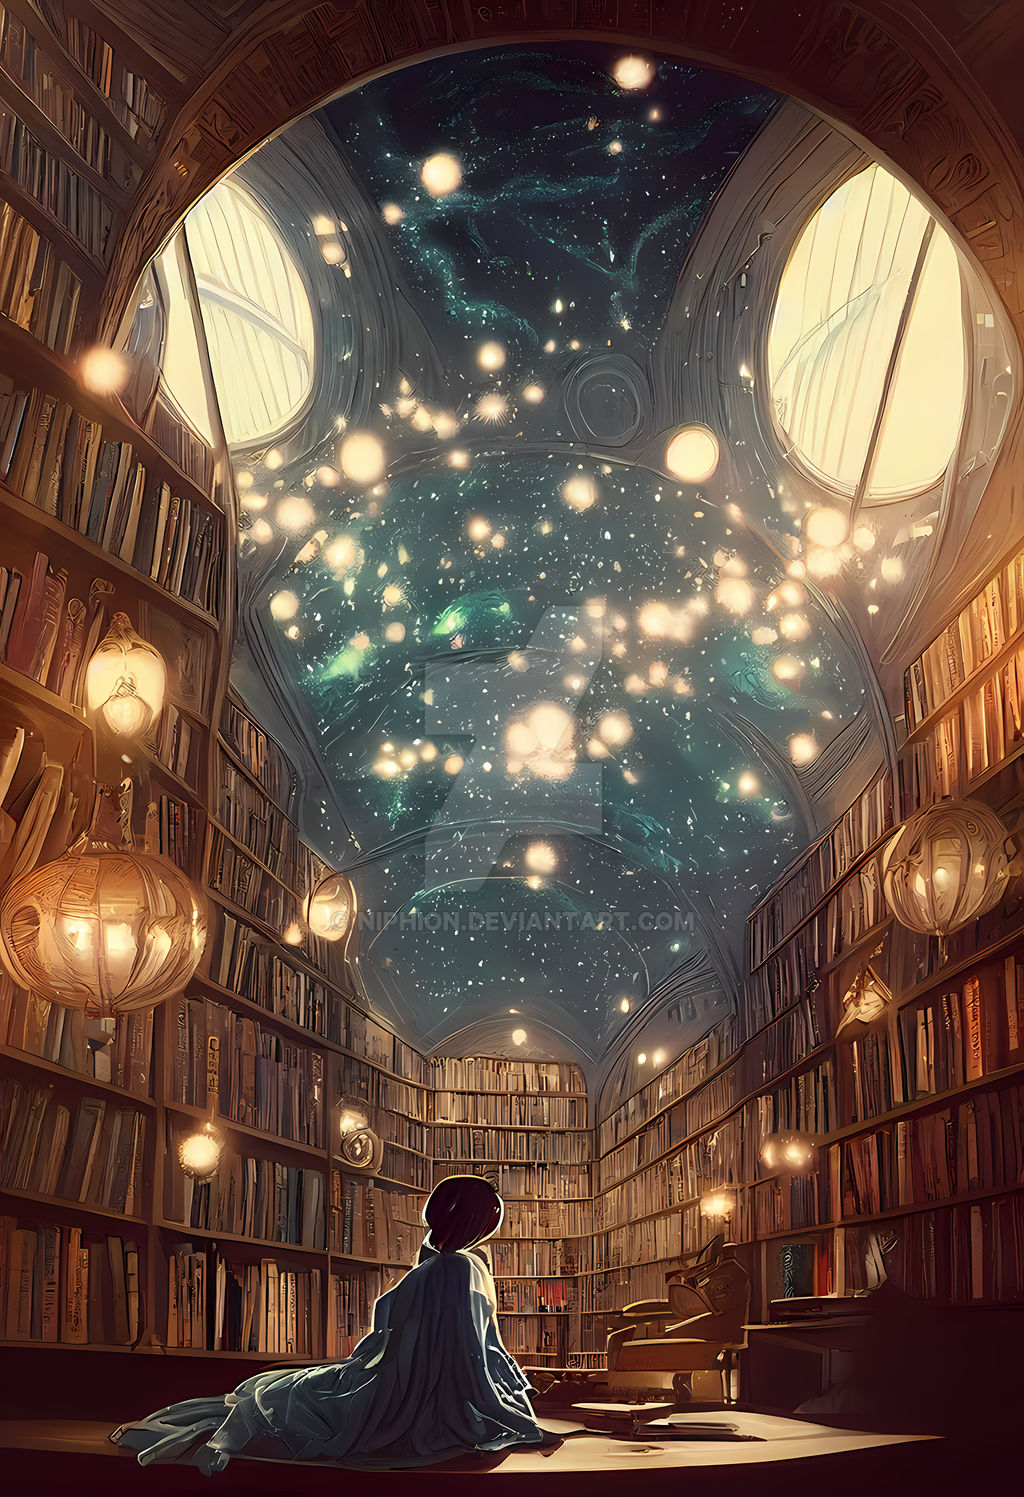 Magical Library (13) by Niphion on DeviantArt